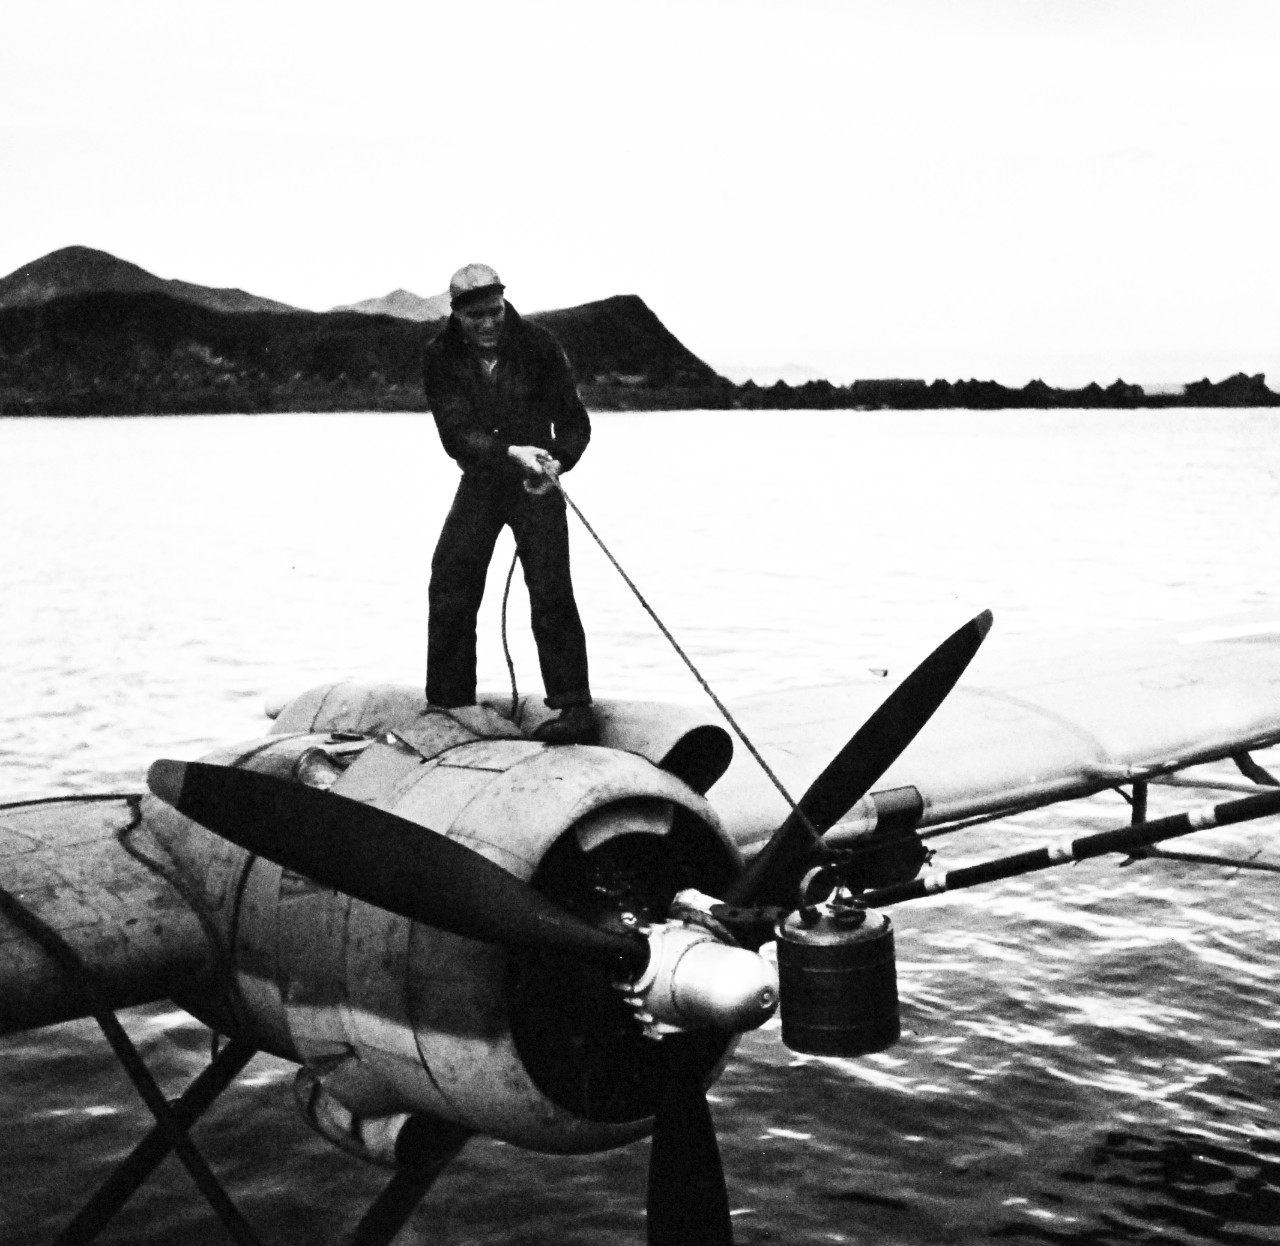 80-G-475768 :  PBY-5 “Catalina” patrol bomber, July 1943.  Can  of oil is hauled aboard a Consolidated PBY “Catalina” aircraft near USS Casco (AVP 12) at Attu, Aleutian Islands.   Photographed by Lieutenant Horace Bristol, July 1943. TR-5367.   U.S. Navy photograph, now in the collections of the National Archives.  (2015/11/17).